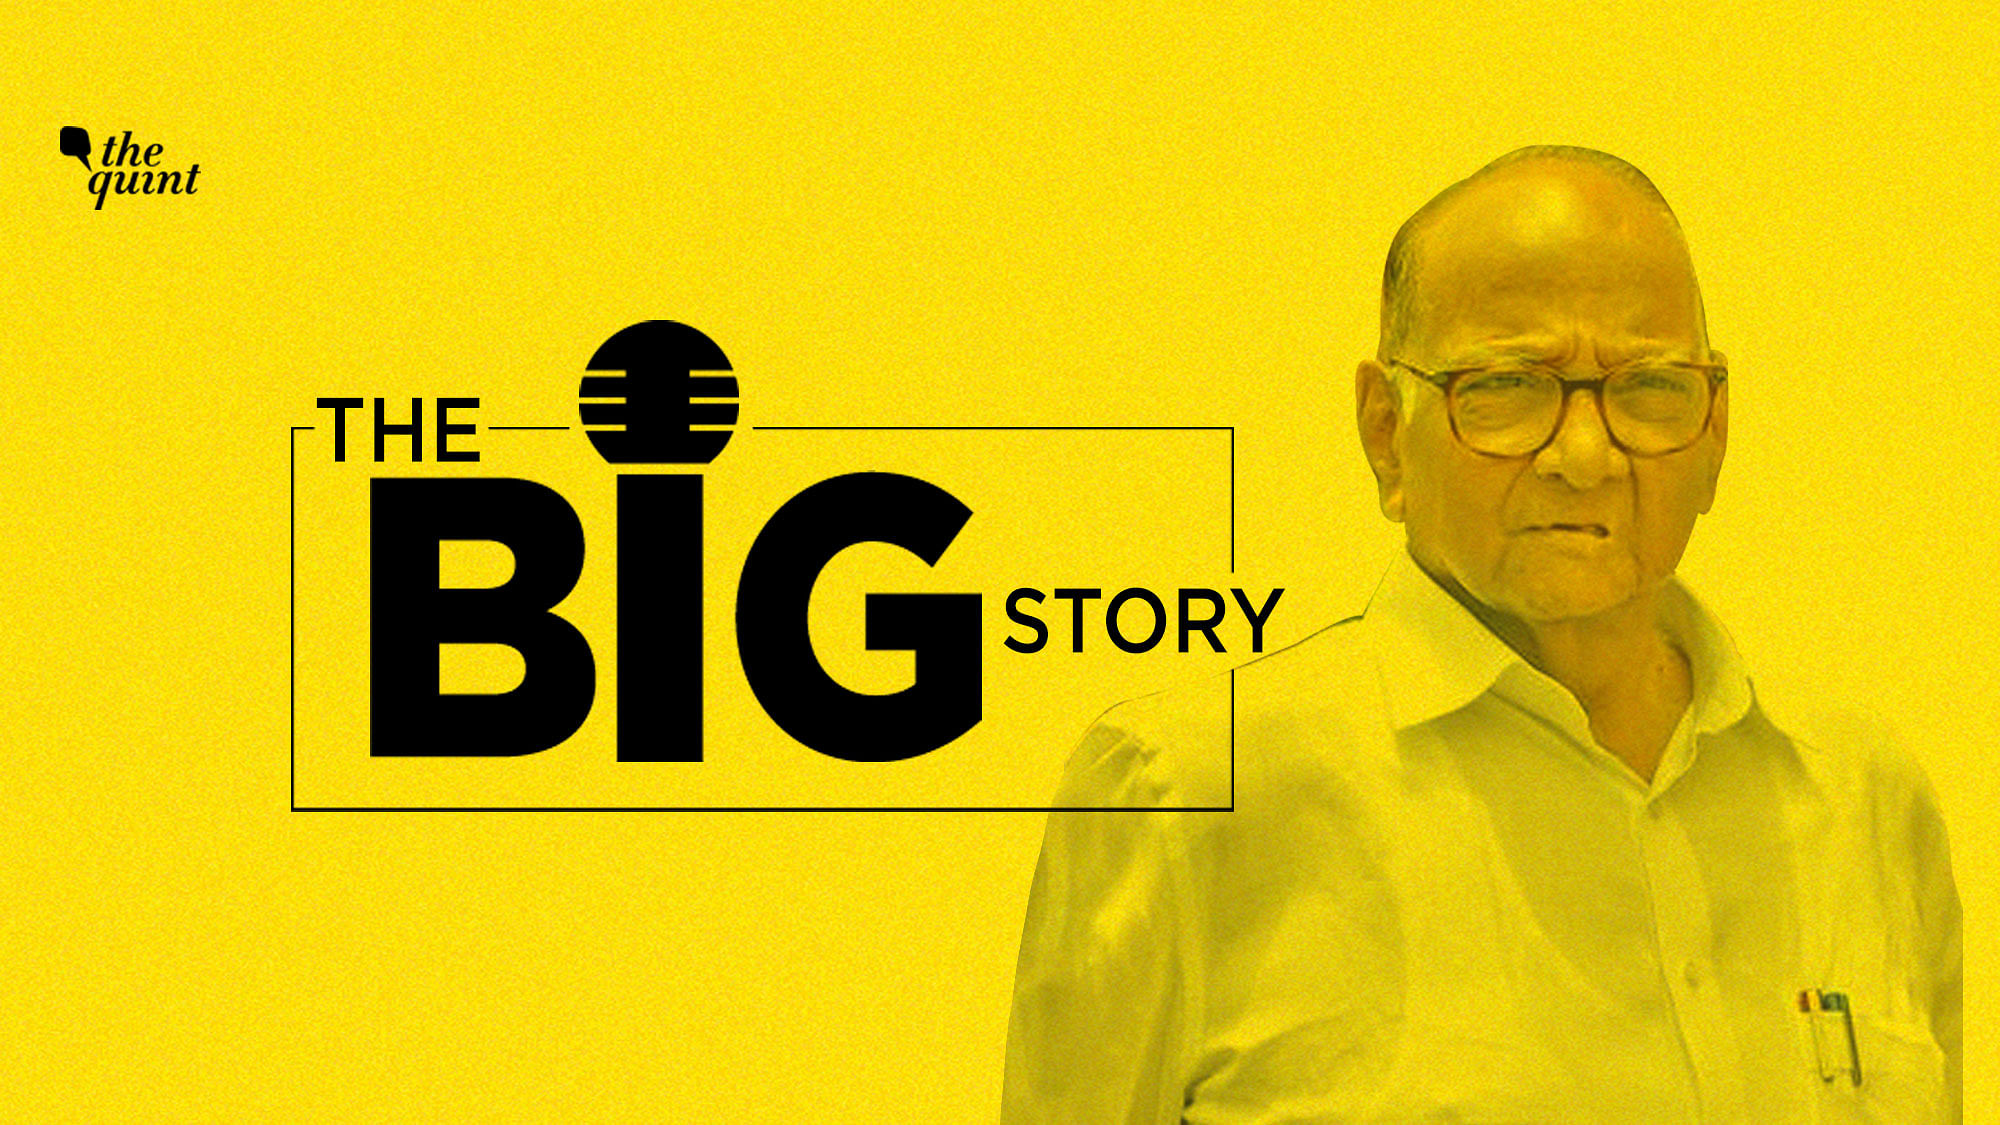 Today we discuss the man who had become Maharashtra’s youngest Chief Minister at the age of 38, the one who founded the NCP in 1999, and the one who’s often called the Maratha Strongman – Sharad Pawar.&nbsp;